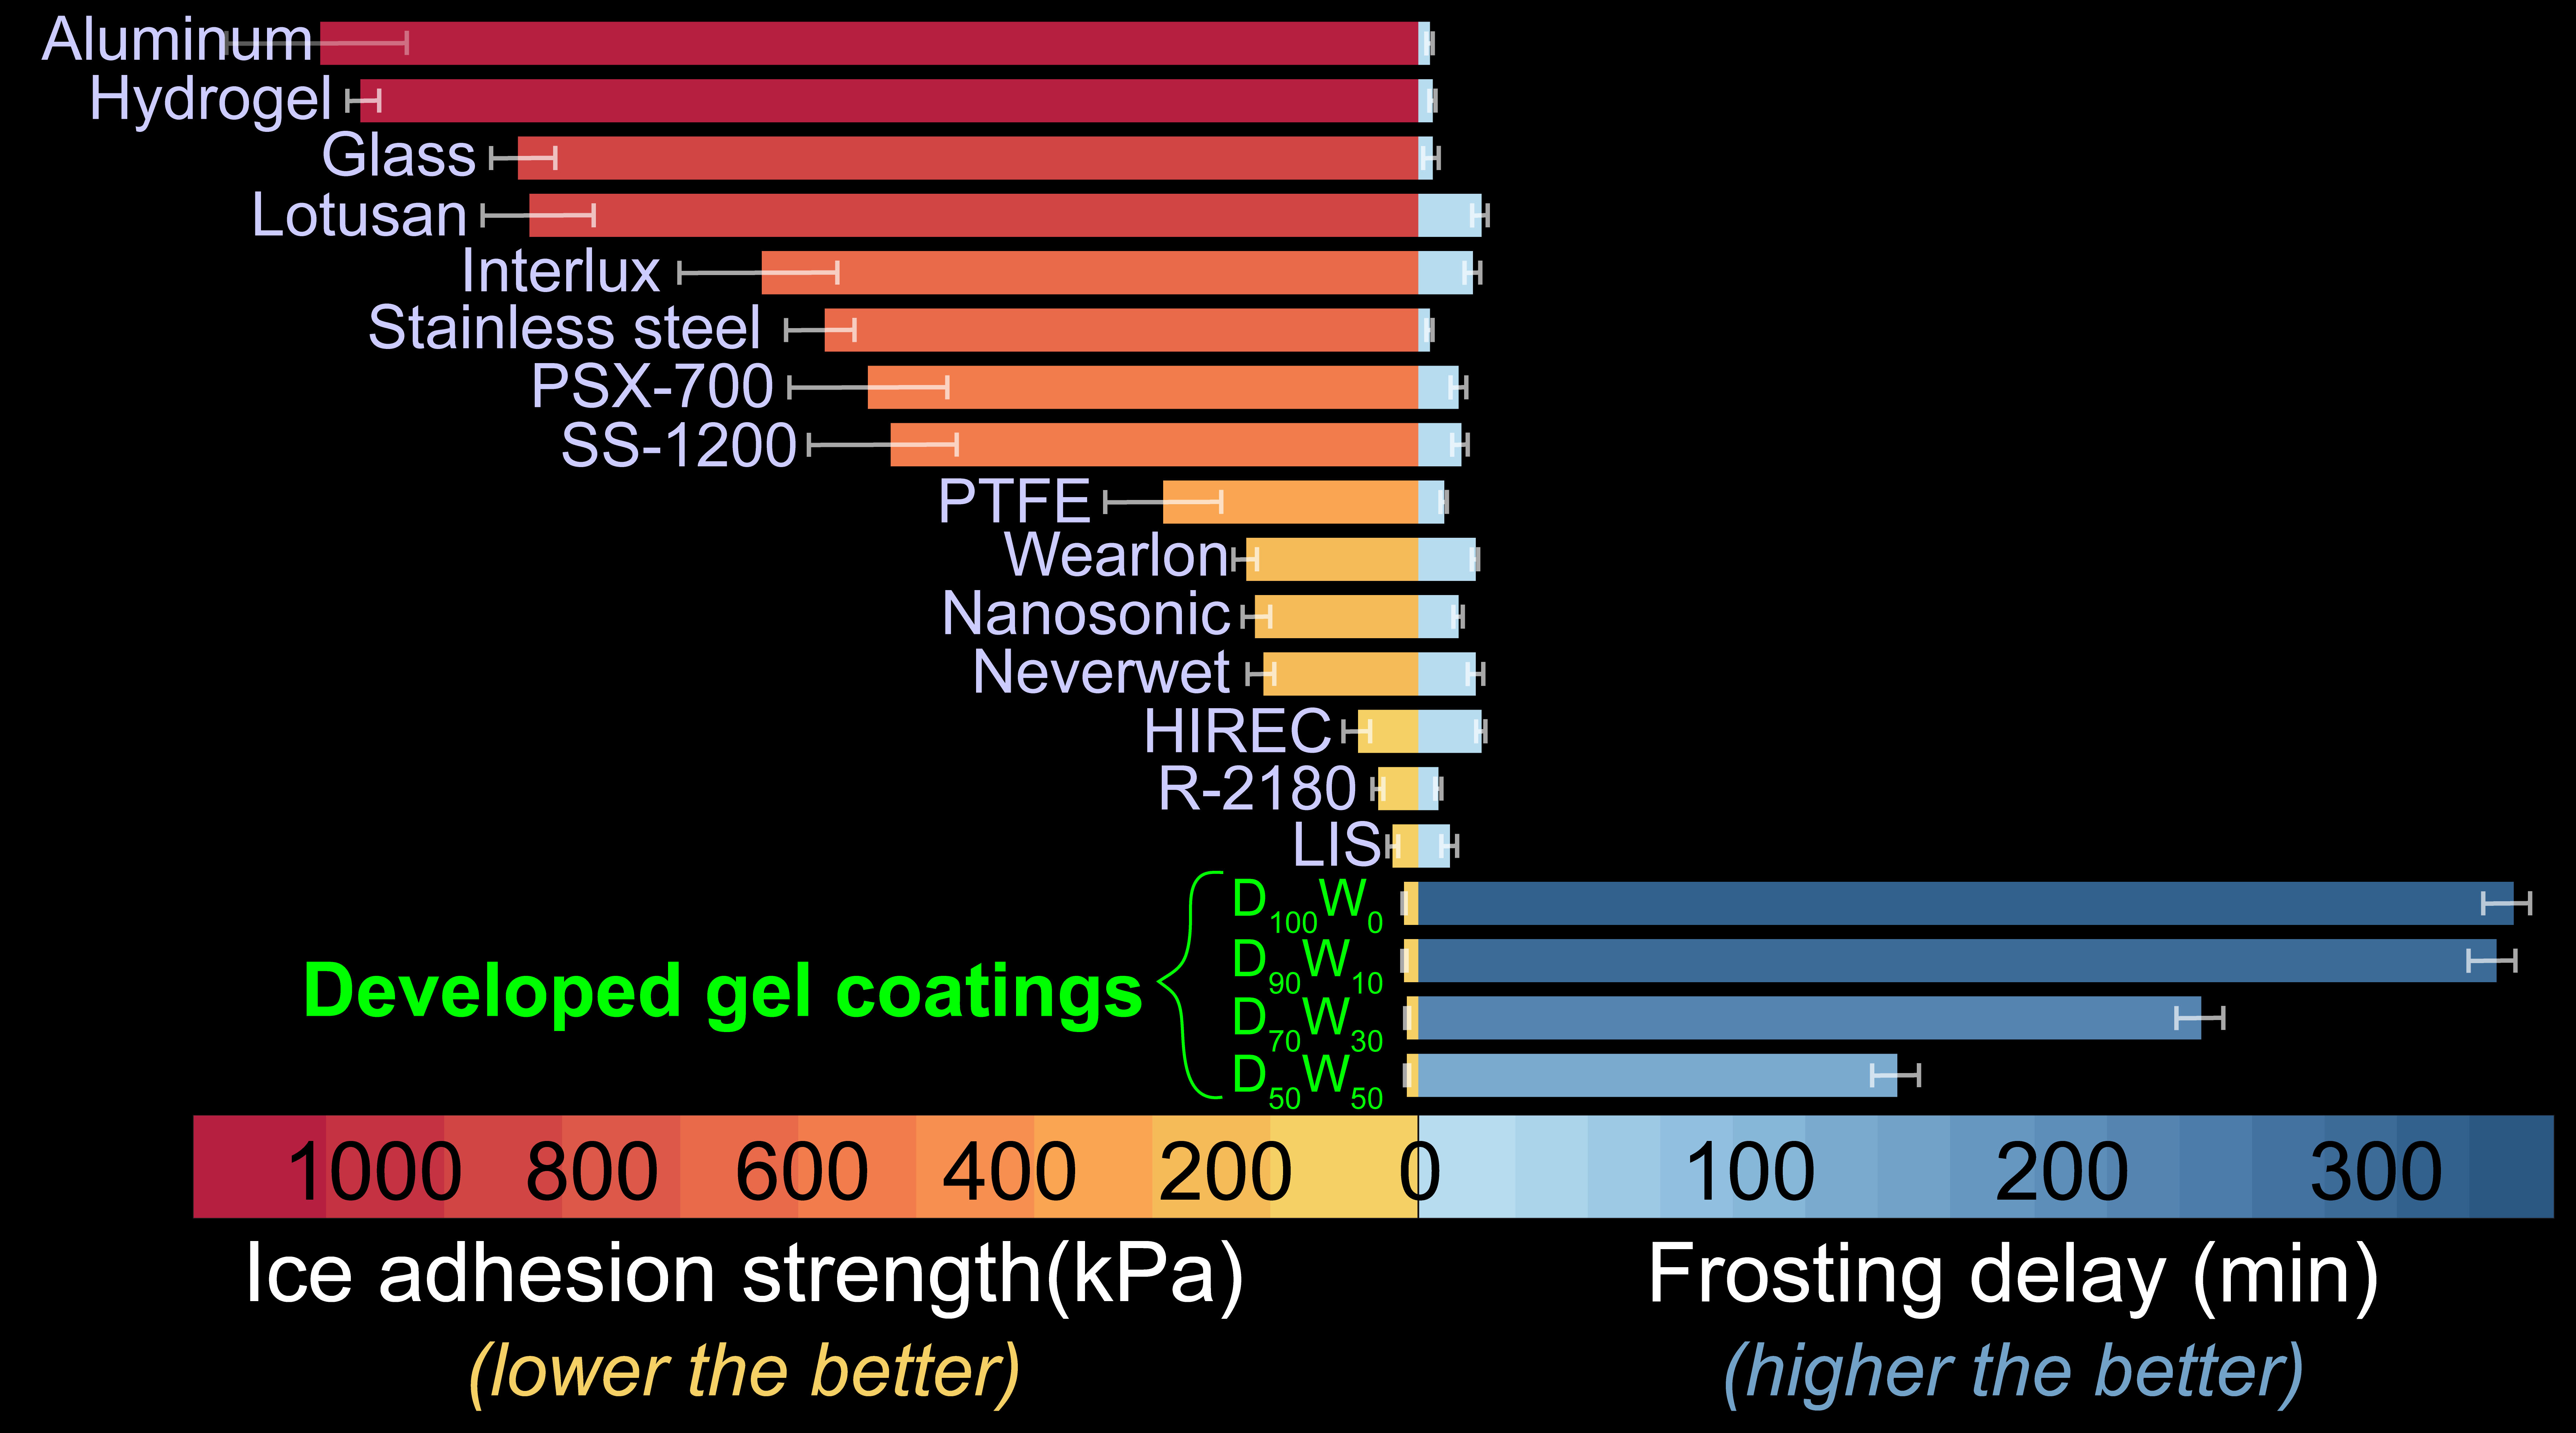 Anti-icing potential and ice adhesion strength (IAS) comparison of hydrogels with baseline materials and commercial protective paints/coatings